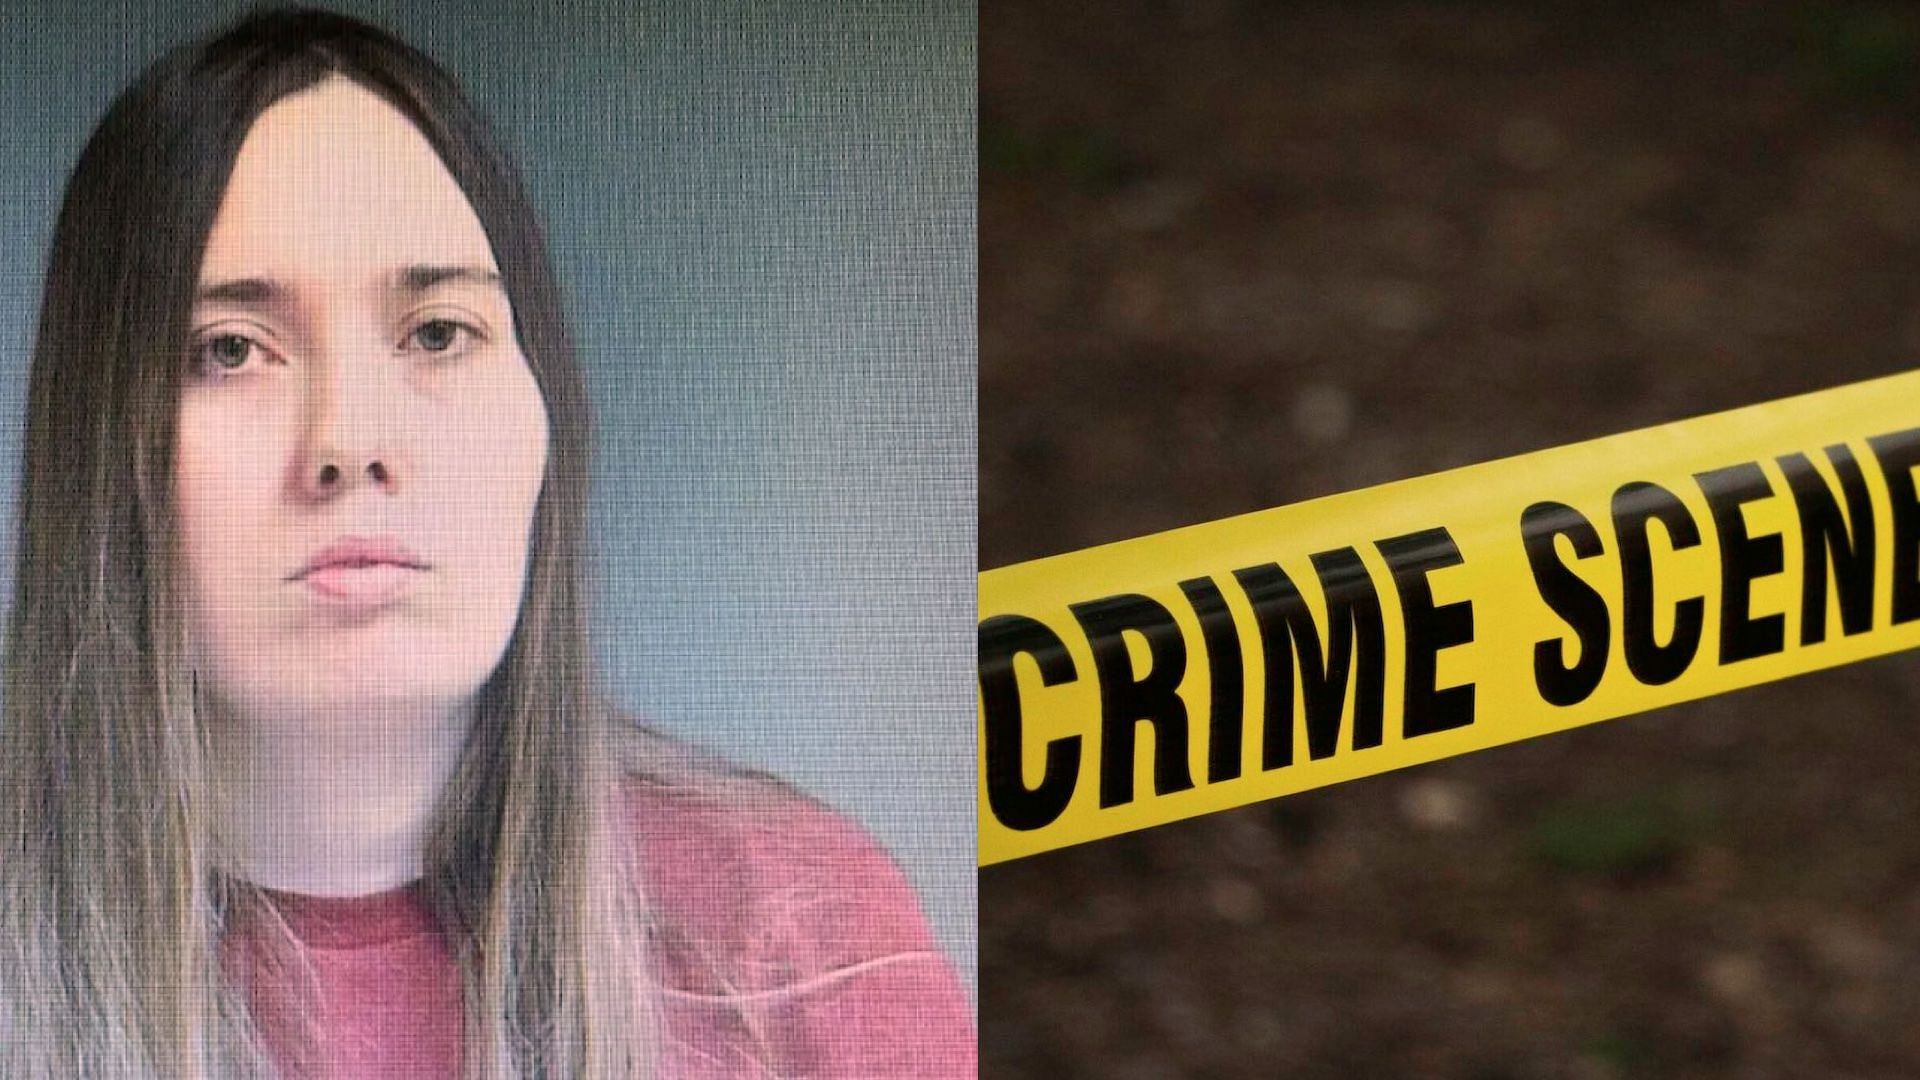 Chelsea Crossland and A Crime Scene (Images via Indiana State Police and Twitter/M&ouml;n Search and Rescue)